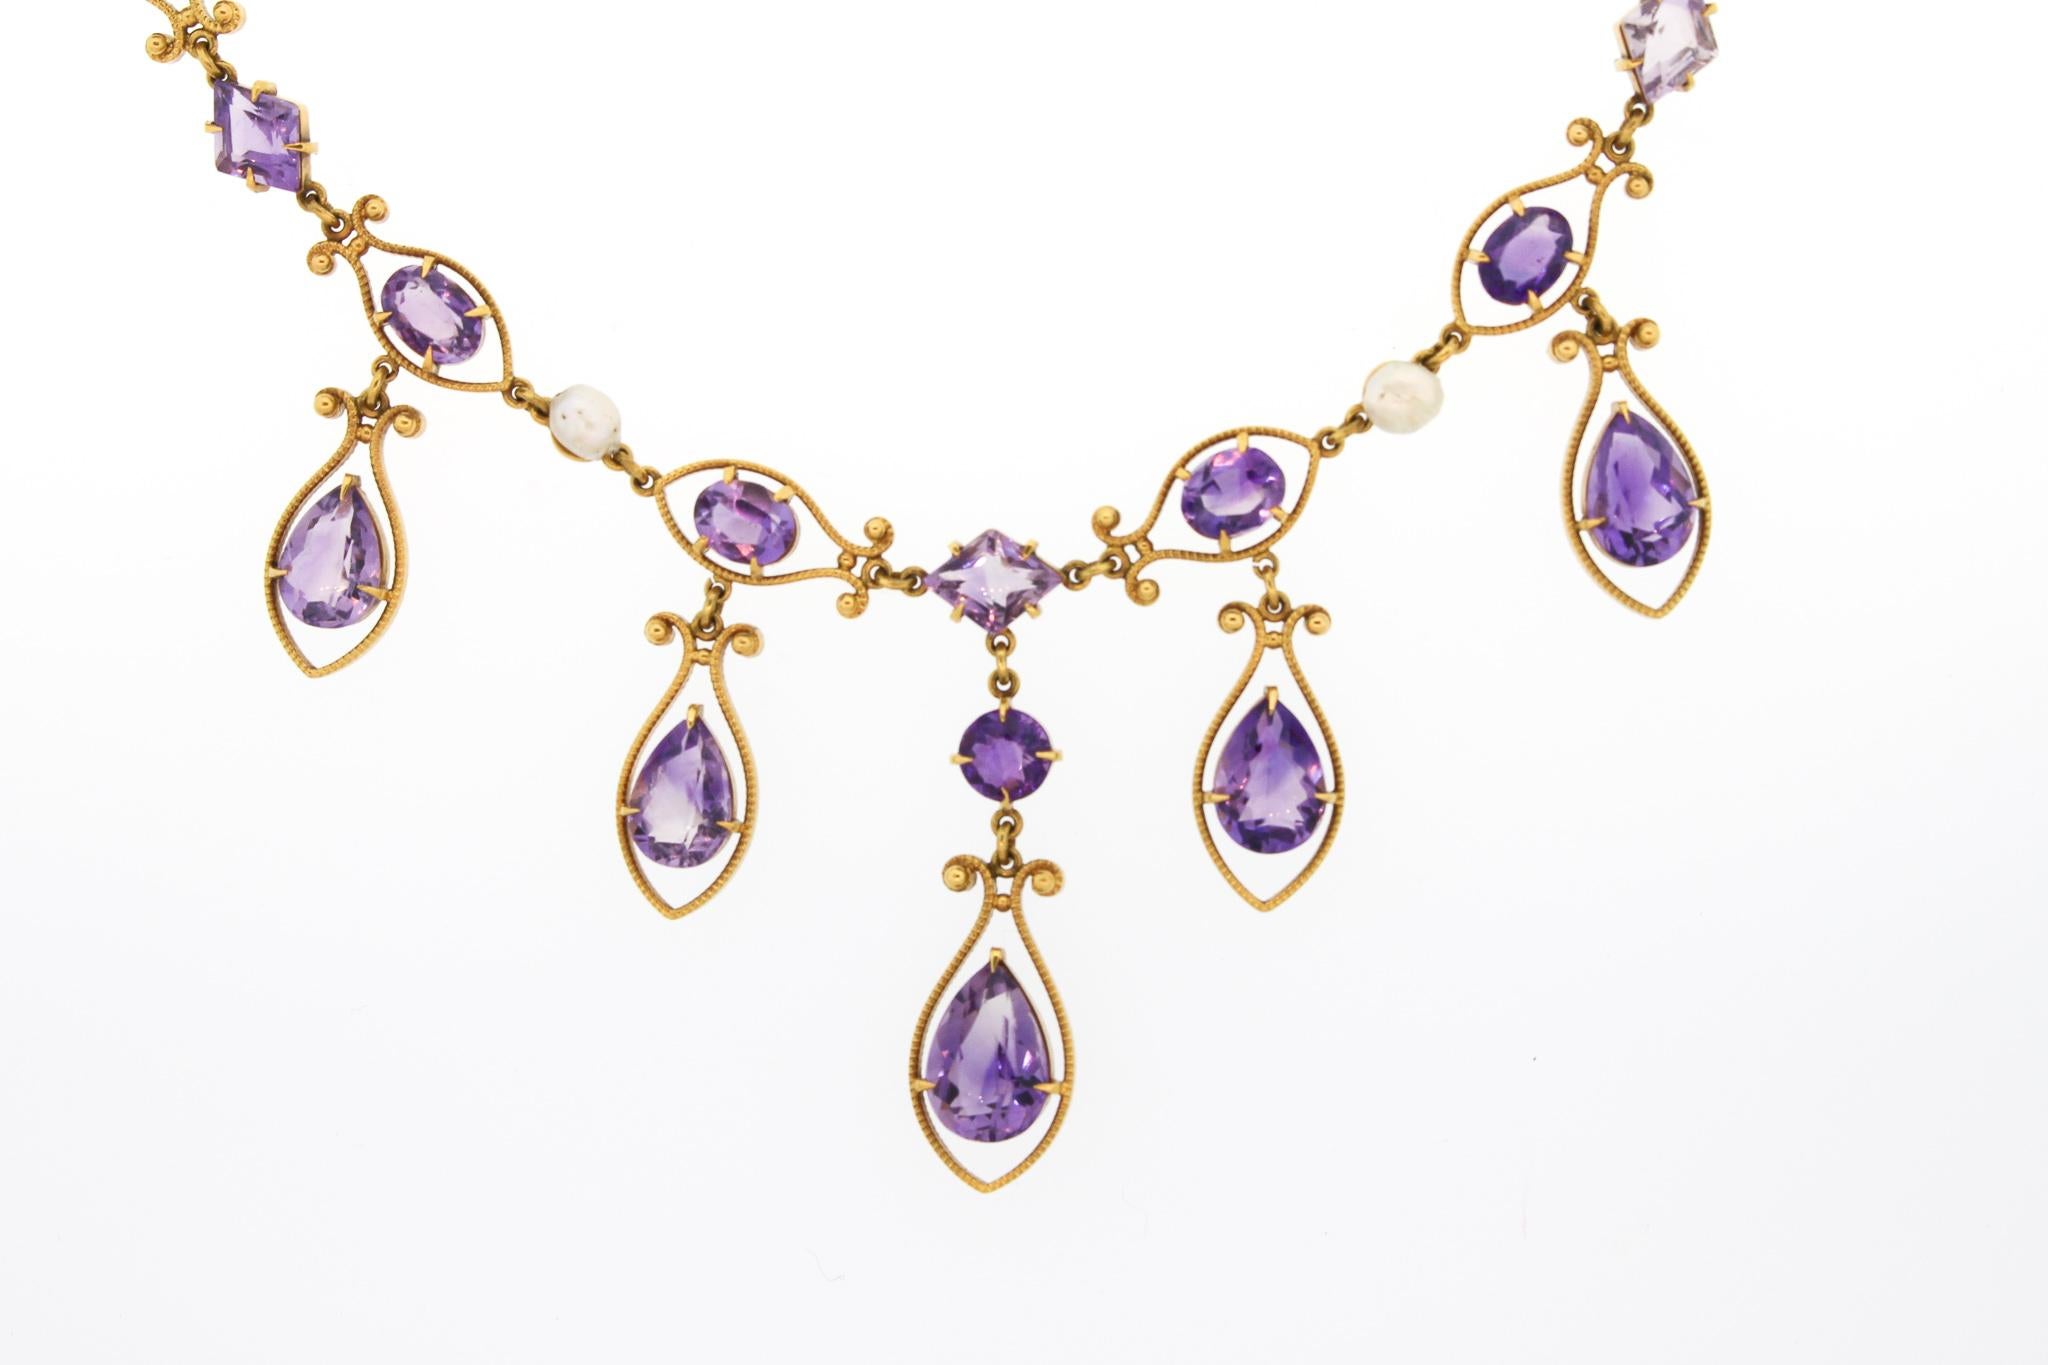 A simply charming and unusual 18k gold amethyst fringe necklace with pearl accents from the Victorian era. The necklace dates to about 1880. The necklace is comprised of oval cut amethysts set within milgrain gold wire links, dotted with natural